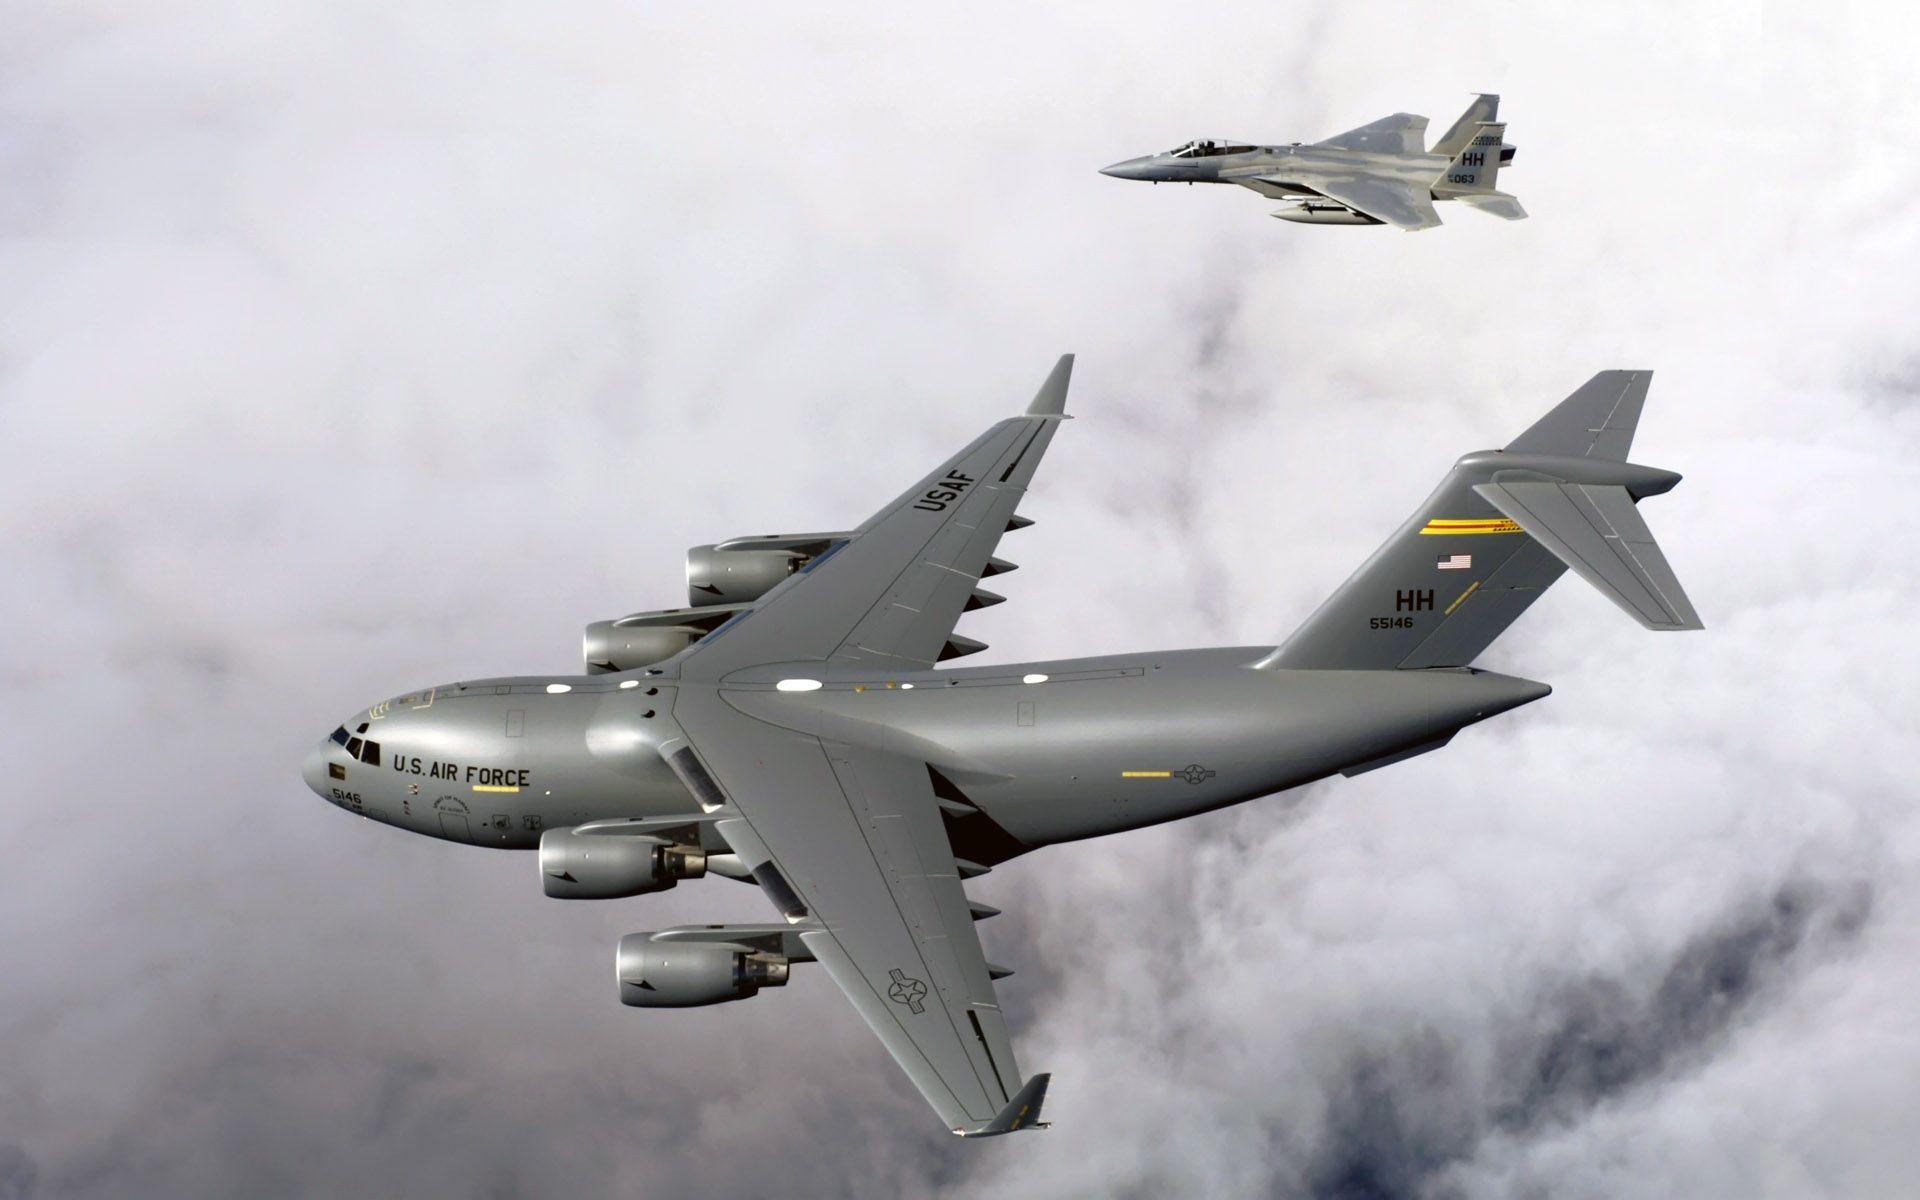 boeing c 17 aircraft wallpaper. Desktop Background for Free HD